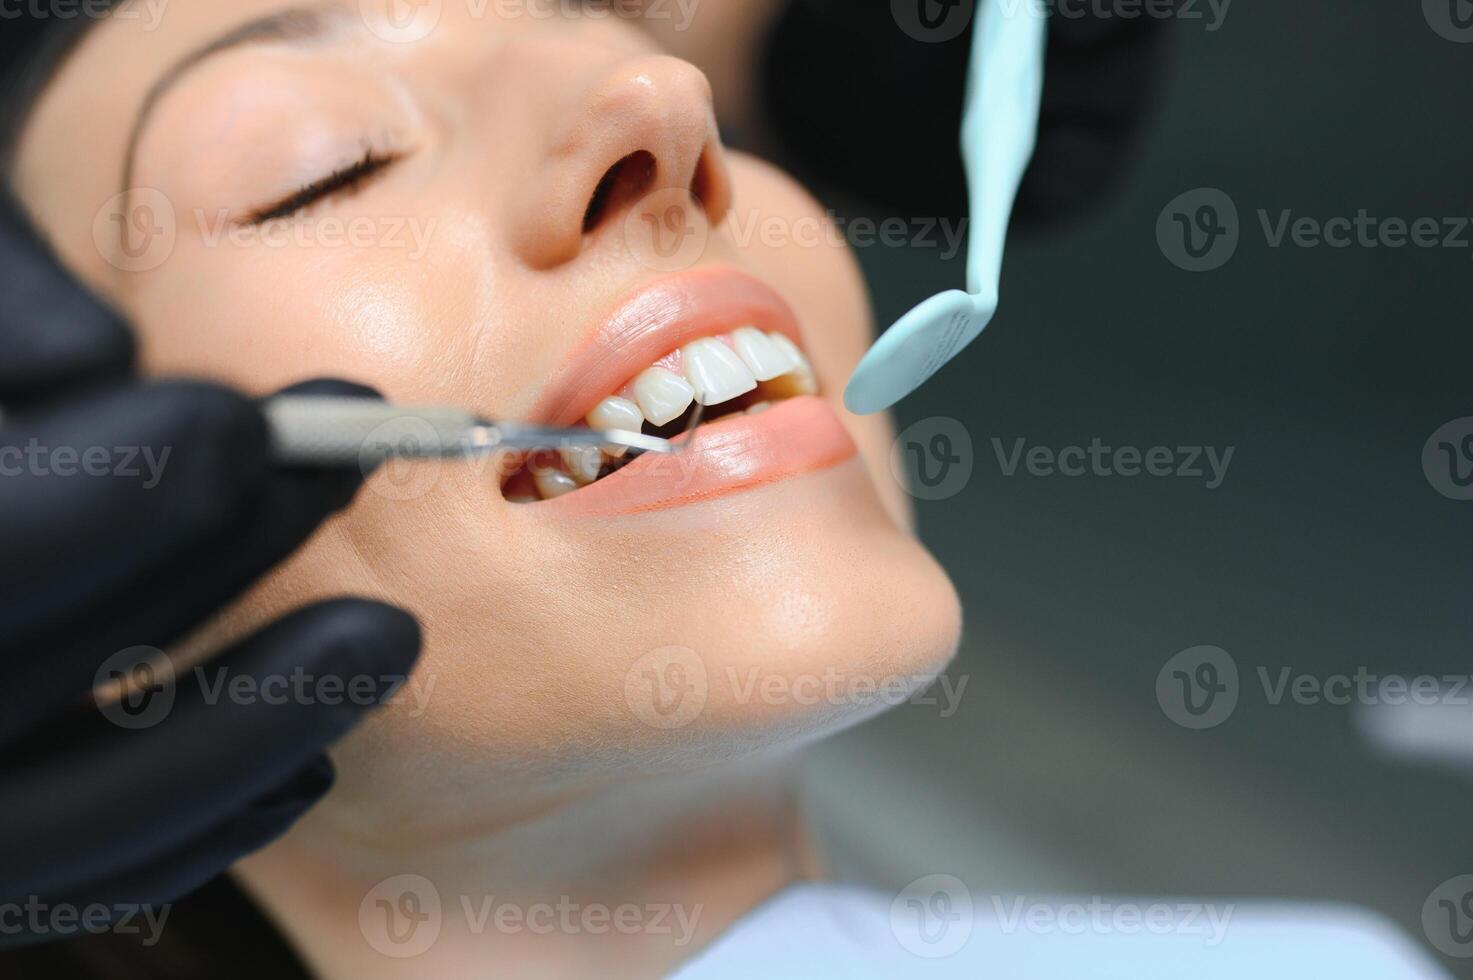 Dentist examining a patient's teeth in the dentist photo